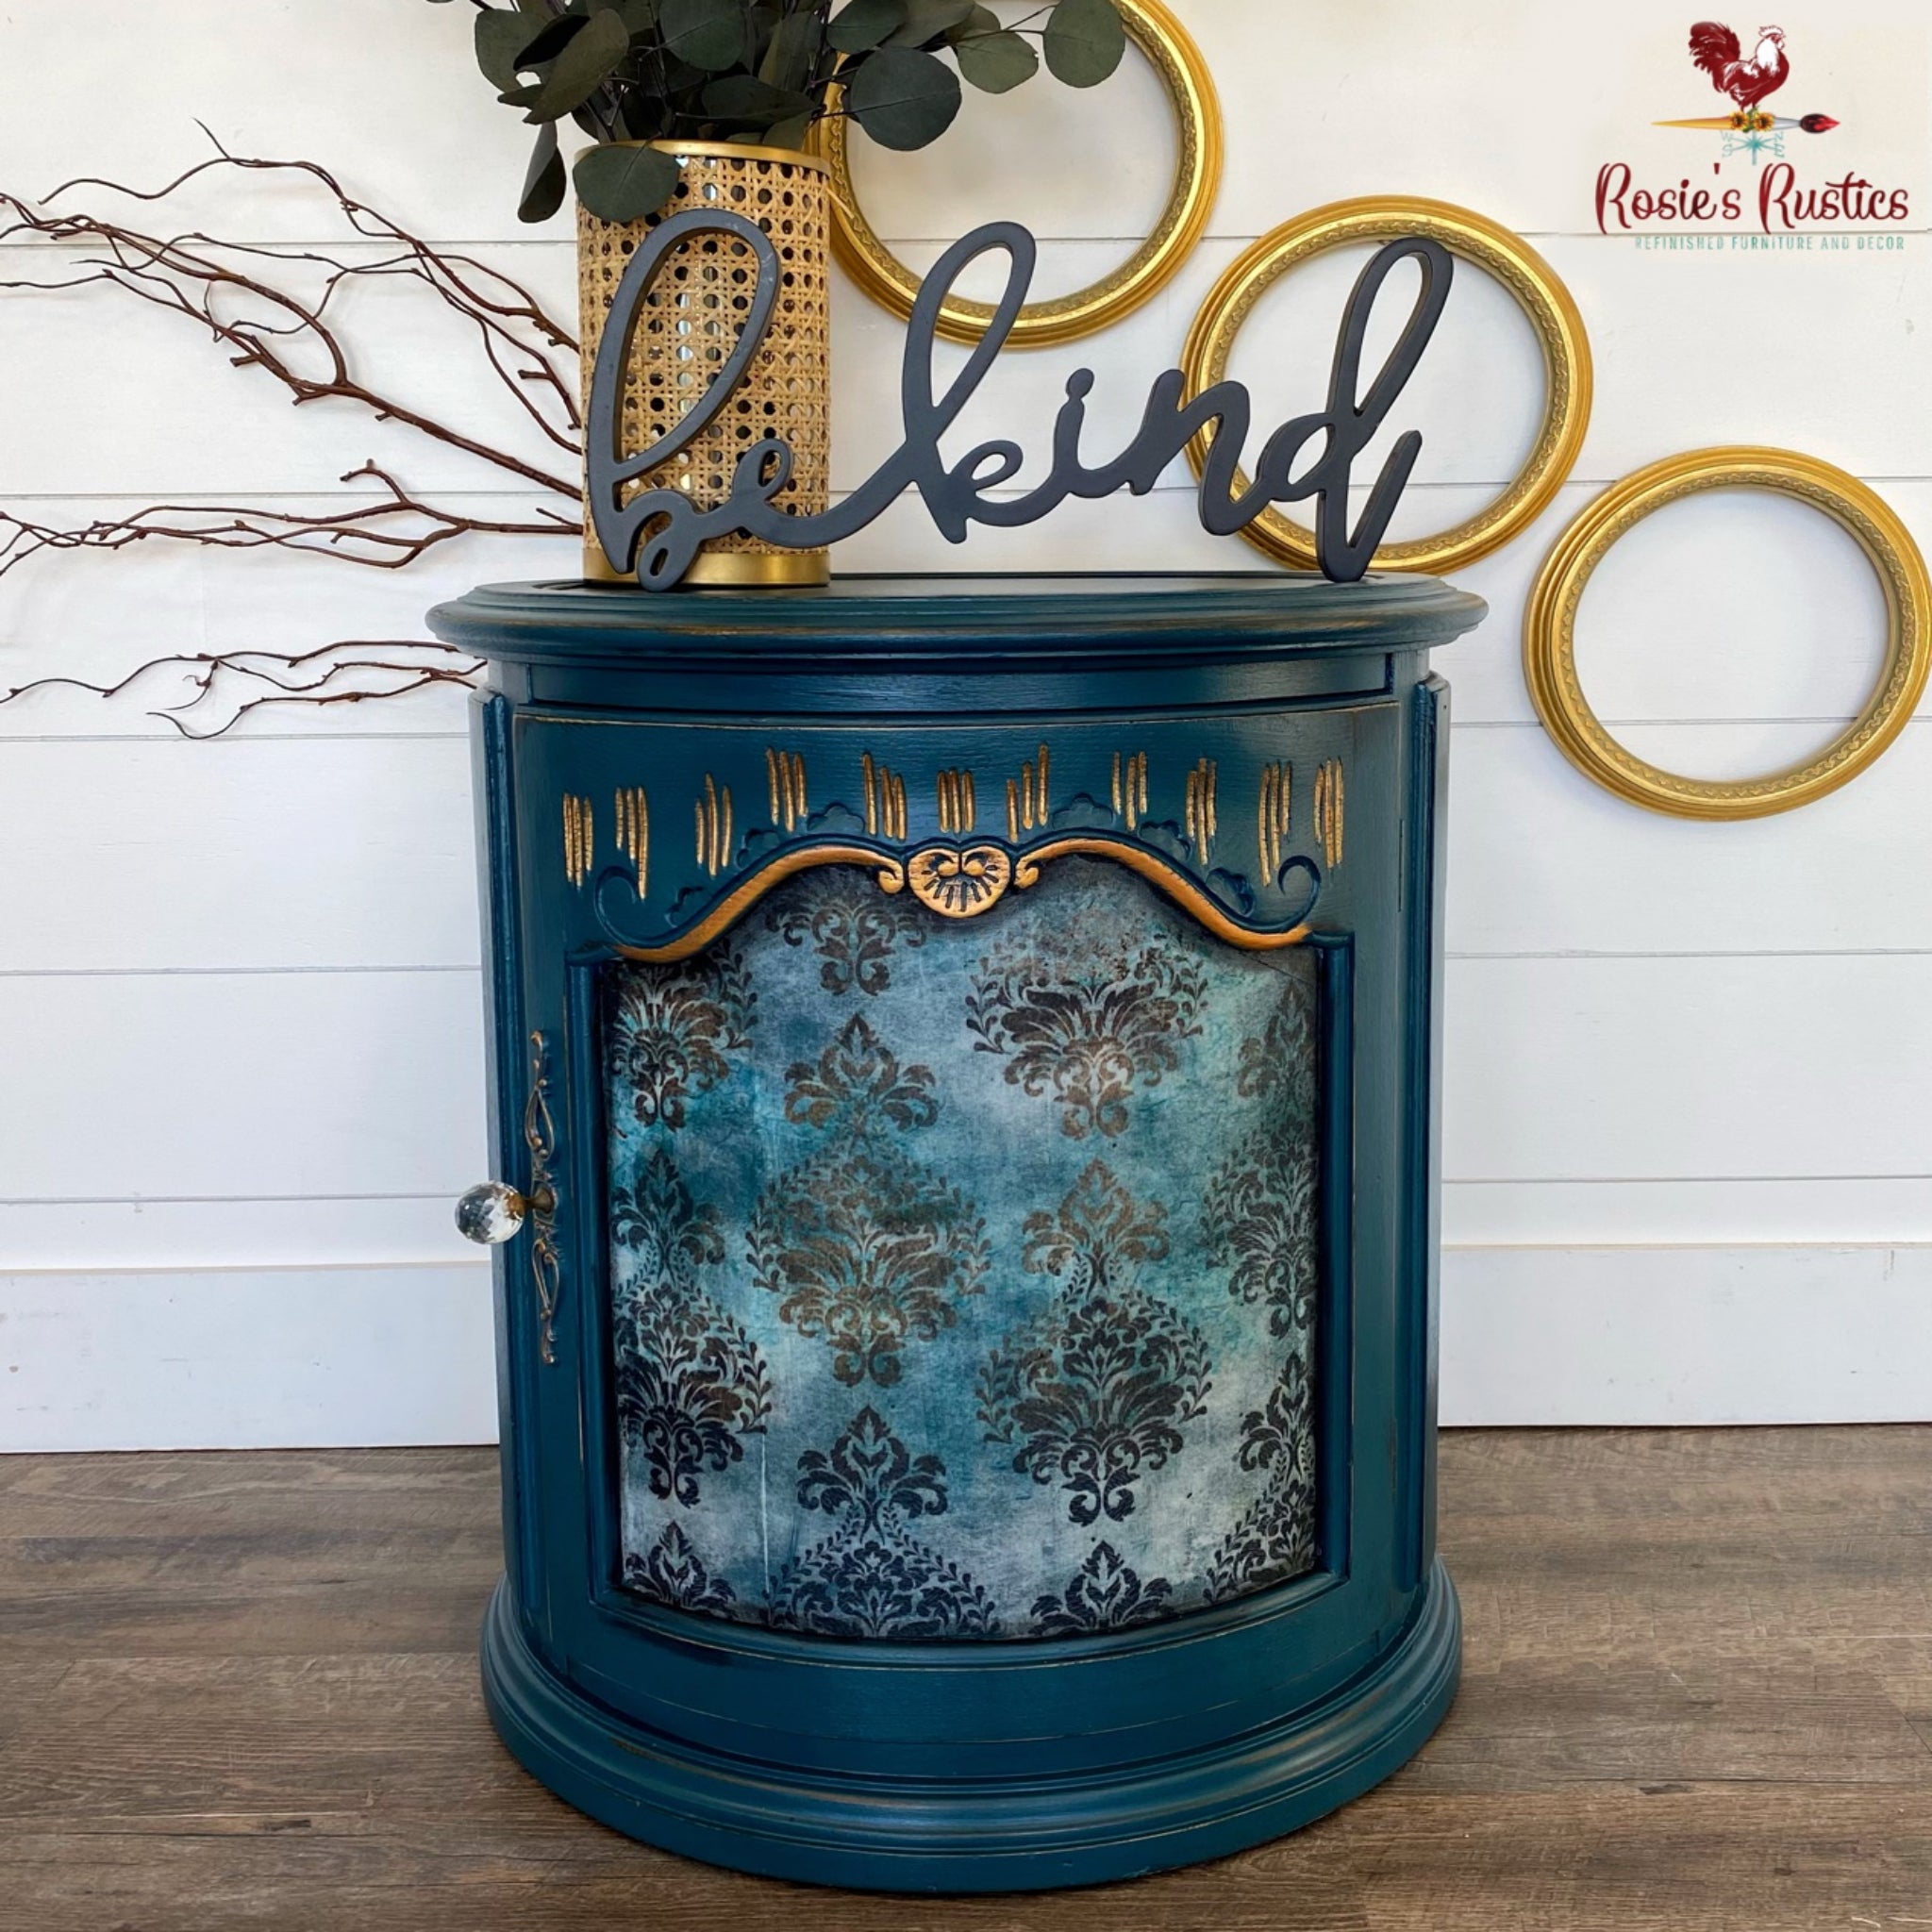 A drum style end table refurbished by Rosie's Rustics is painted blue and features ReDesign with Prima's Patina Flourish tissue paper on its door inlay.